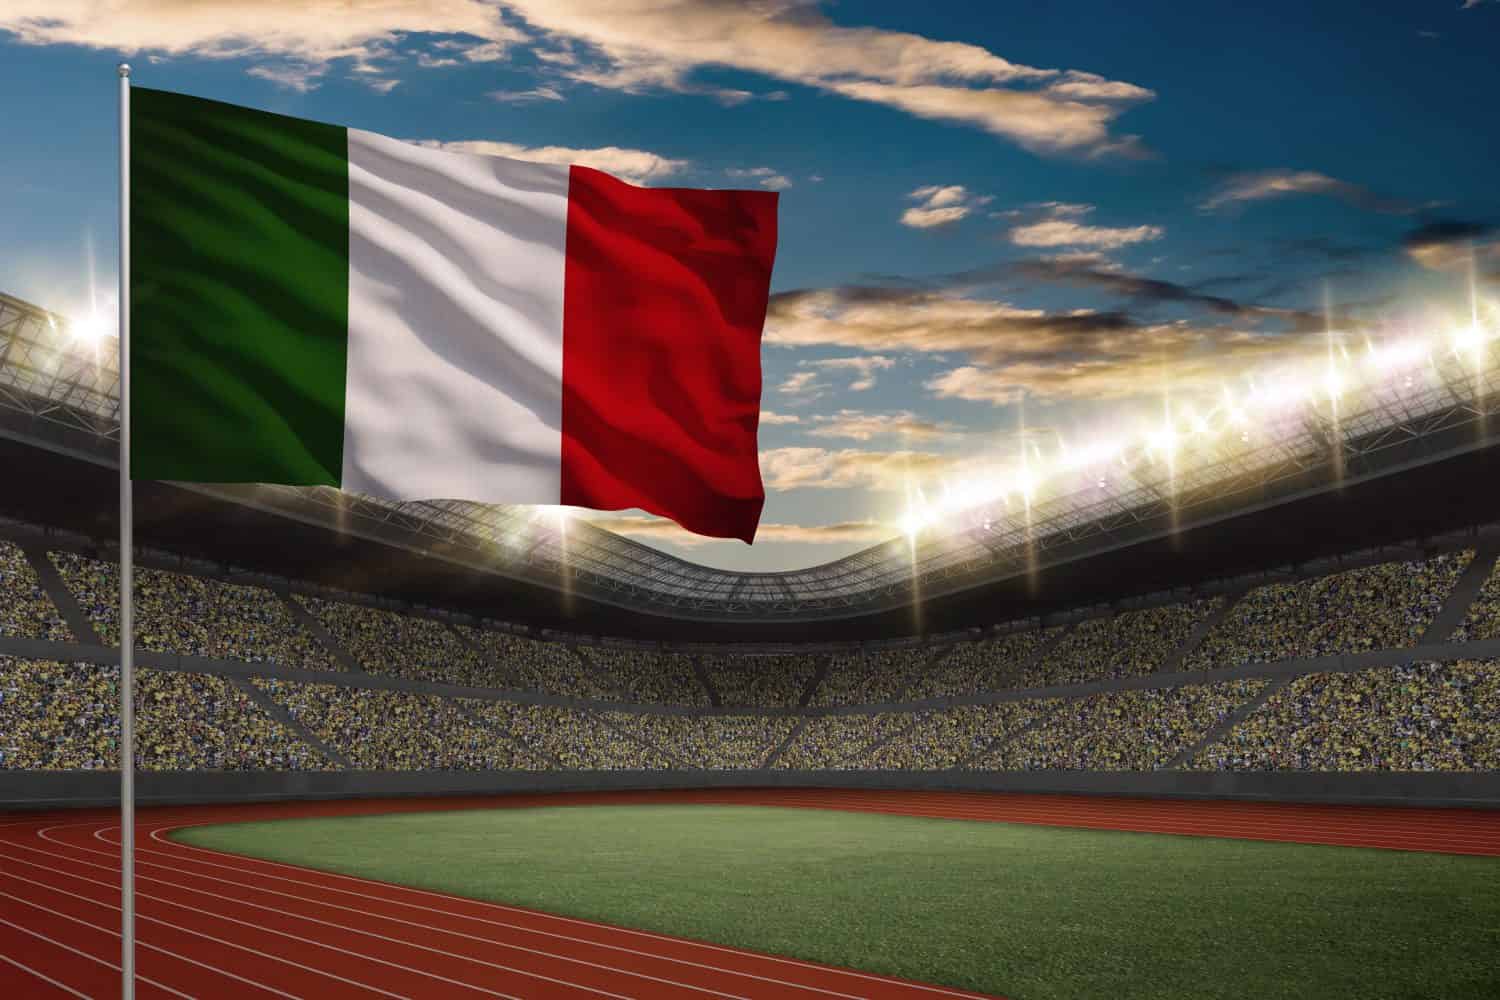 Italian Flag in front of a Track and field Stadium with fans.